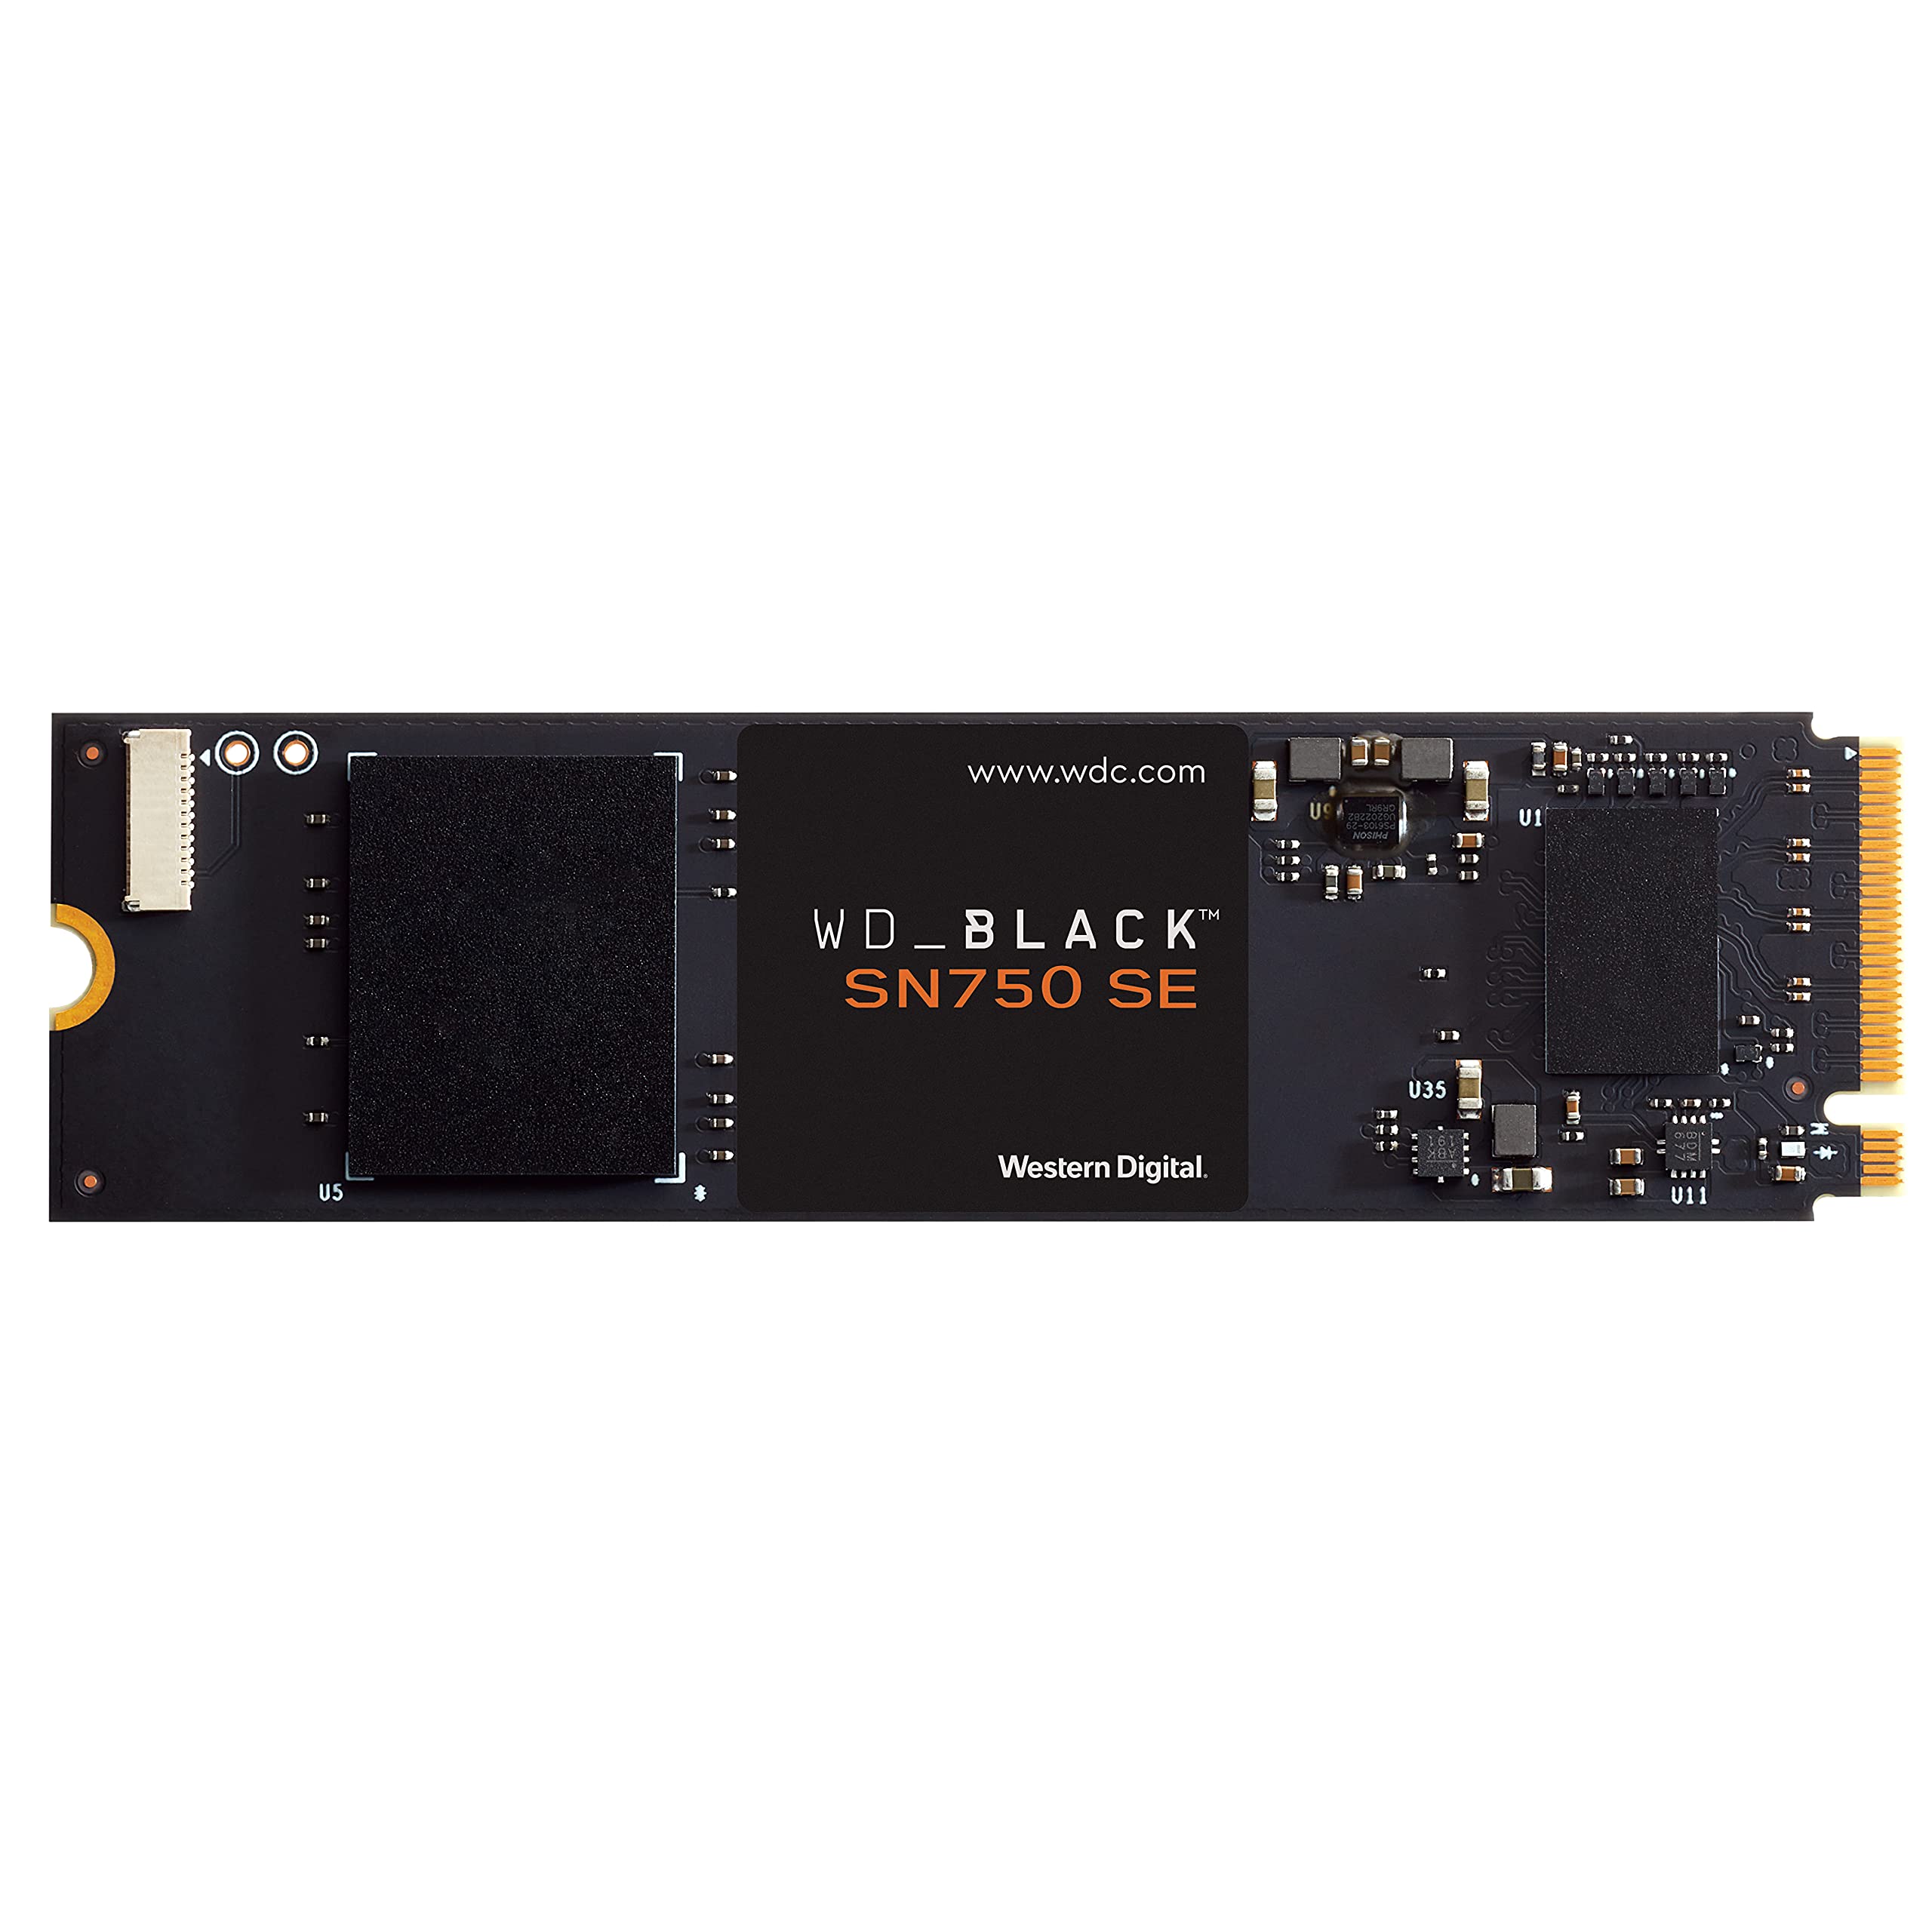 WD_BLACK SN750 SE 1TB M.2 2280 PCIe Gen4 NVMe Gaming SSD up to 3600 MB/s read speed